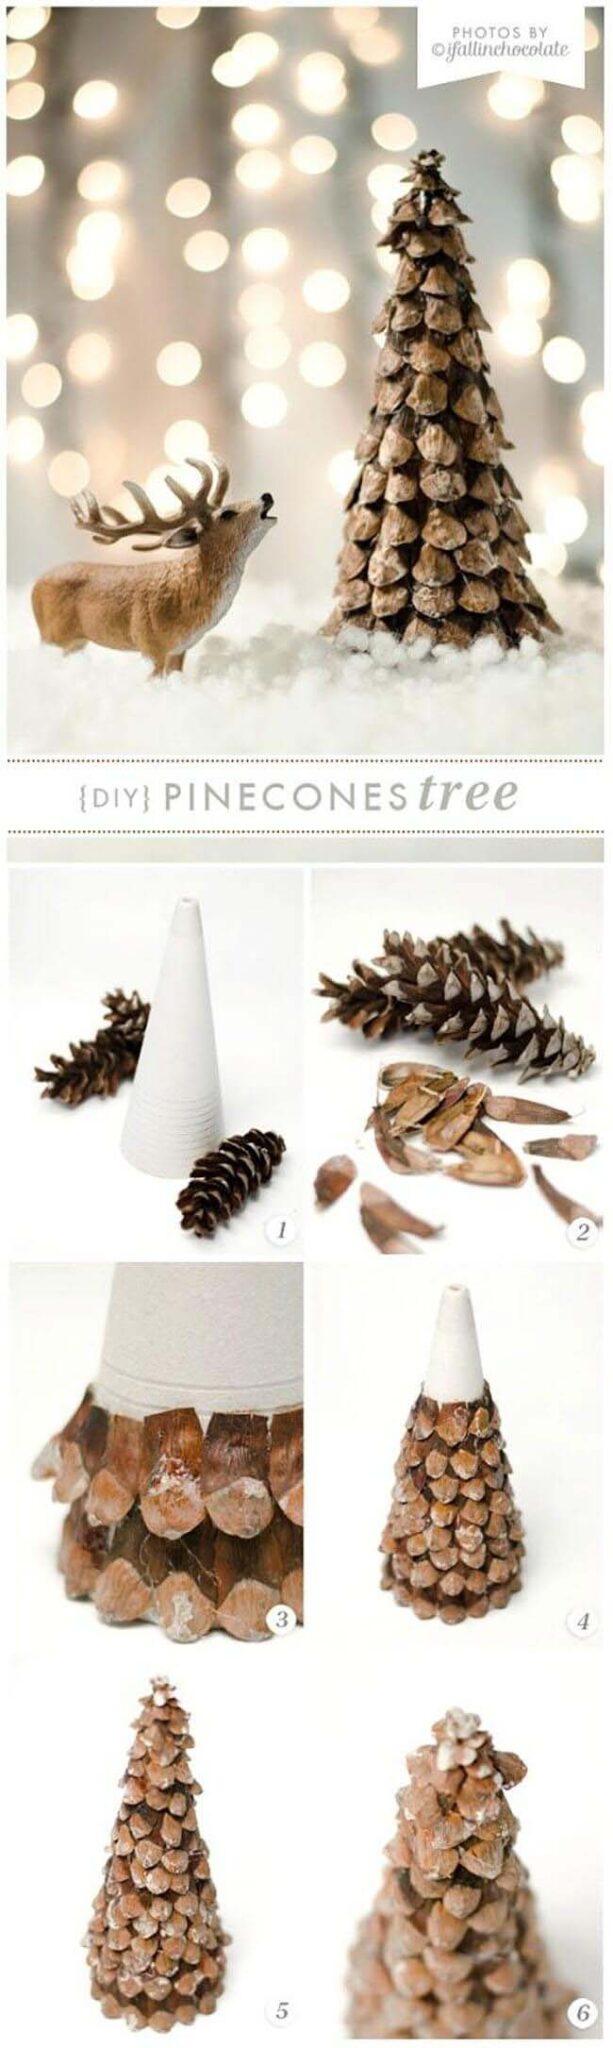 40 Amazing Pine Cone Crafts You Can DIY For Every Occasion